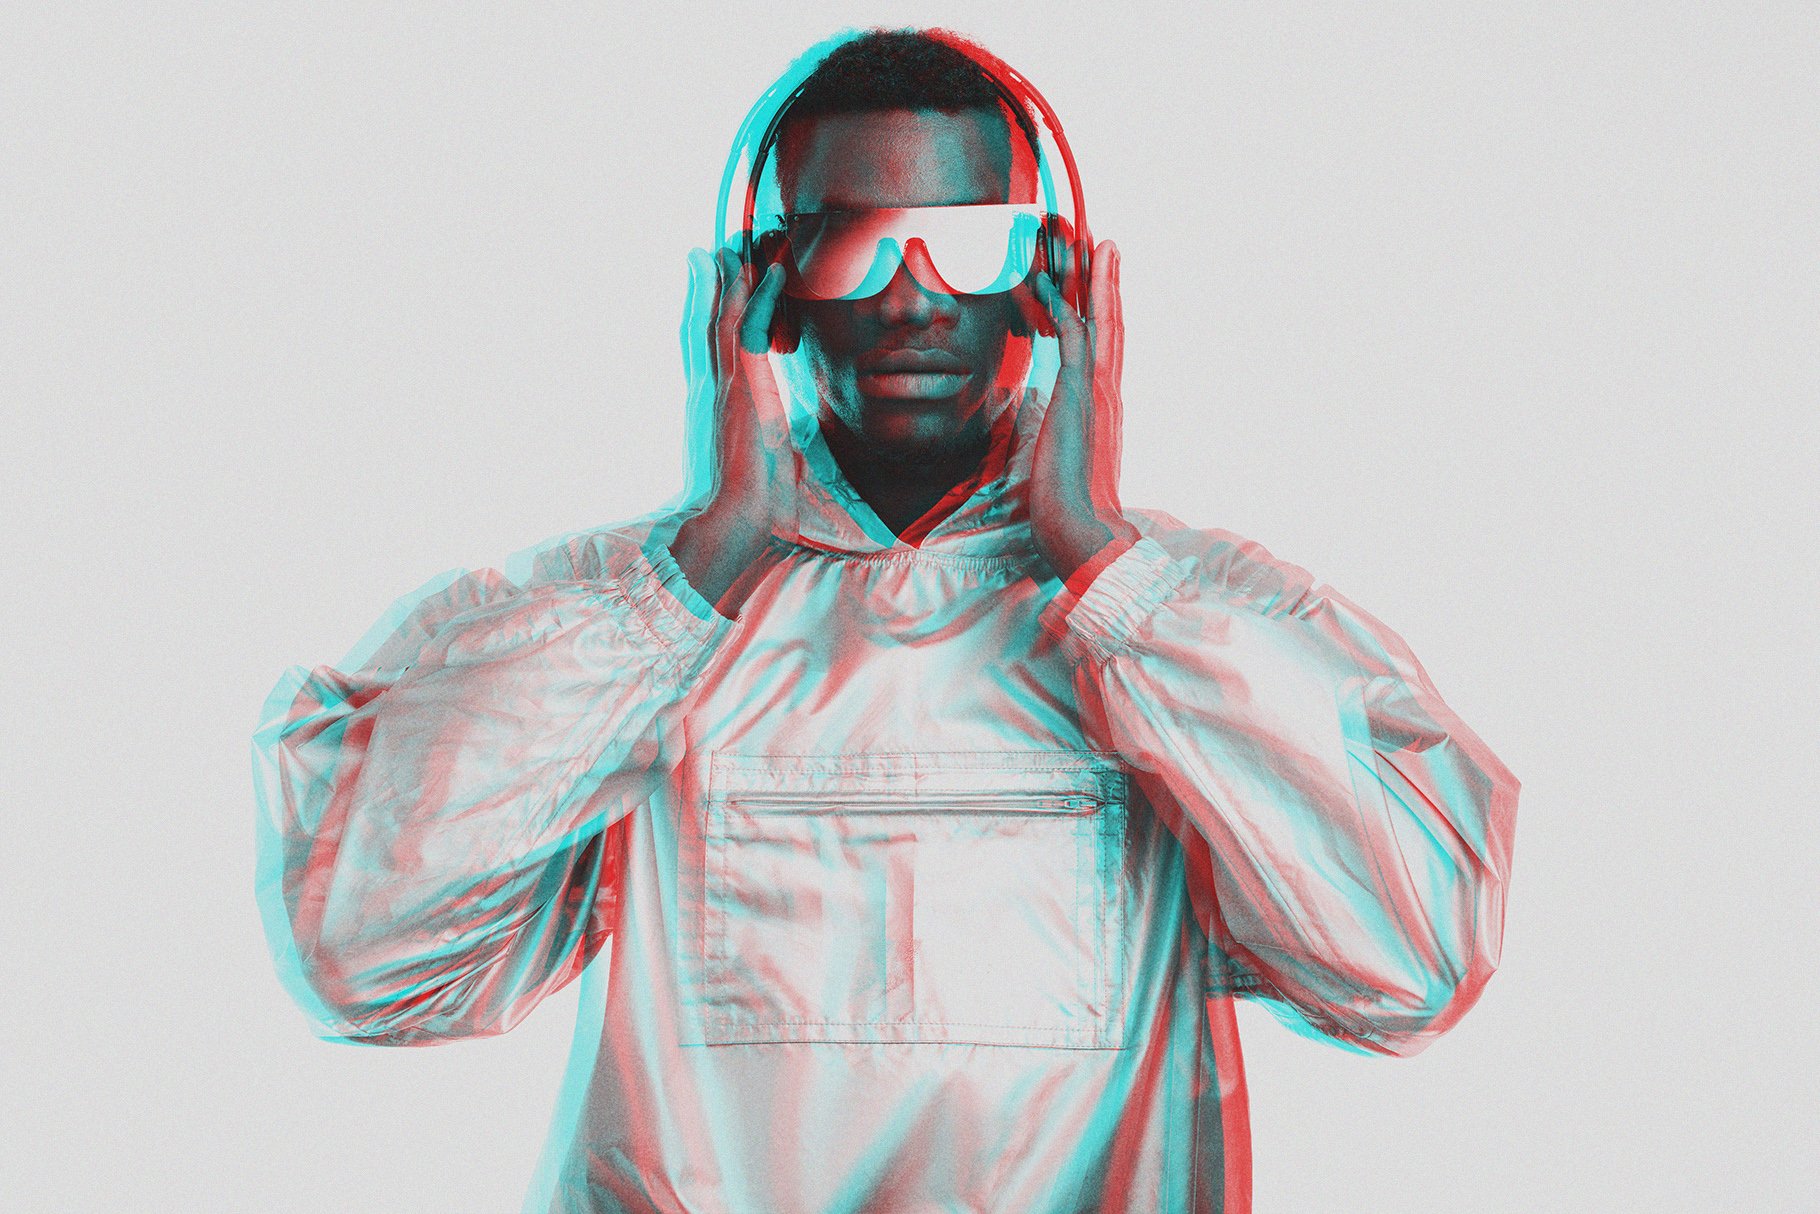 Anaglyph 3D Photoshop Effectpreview image.